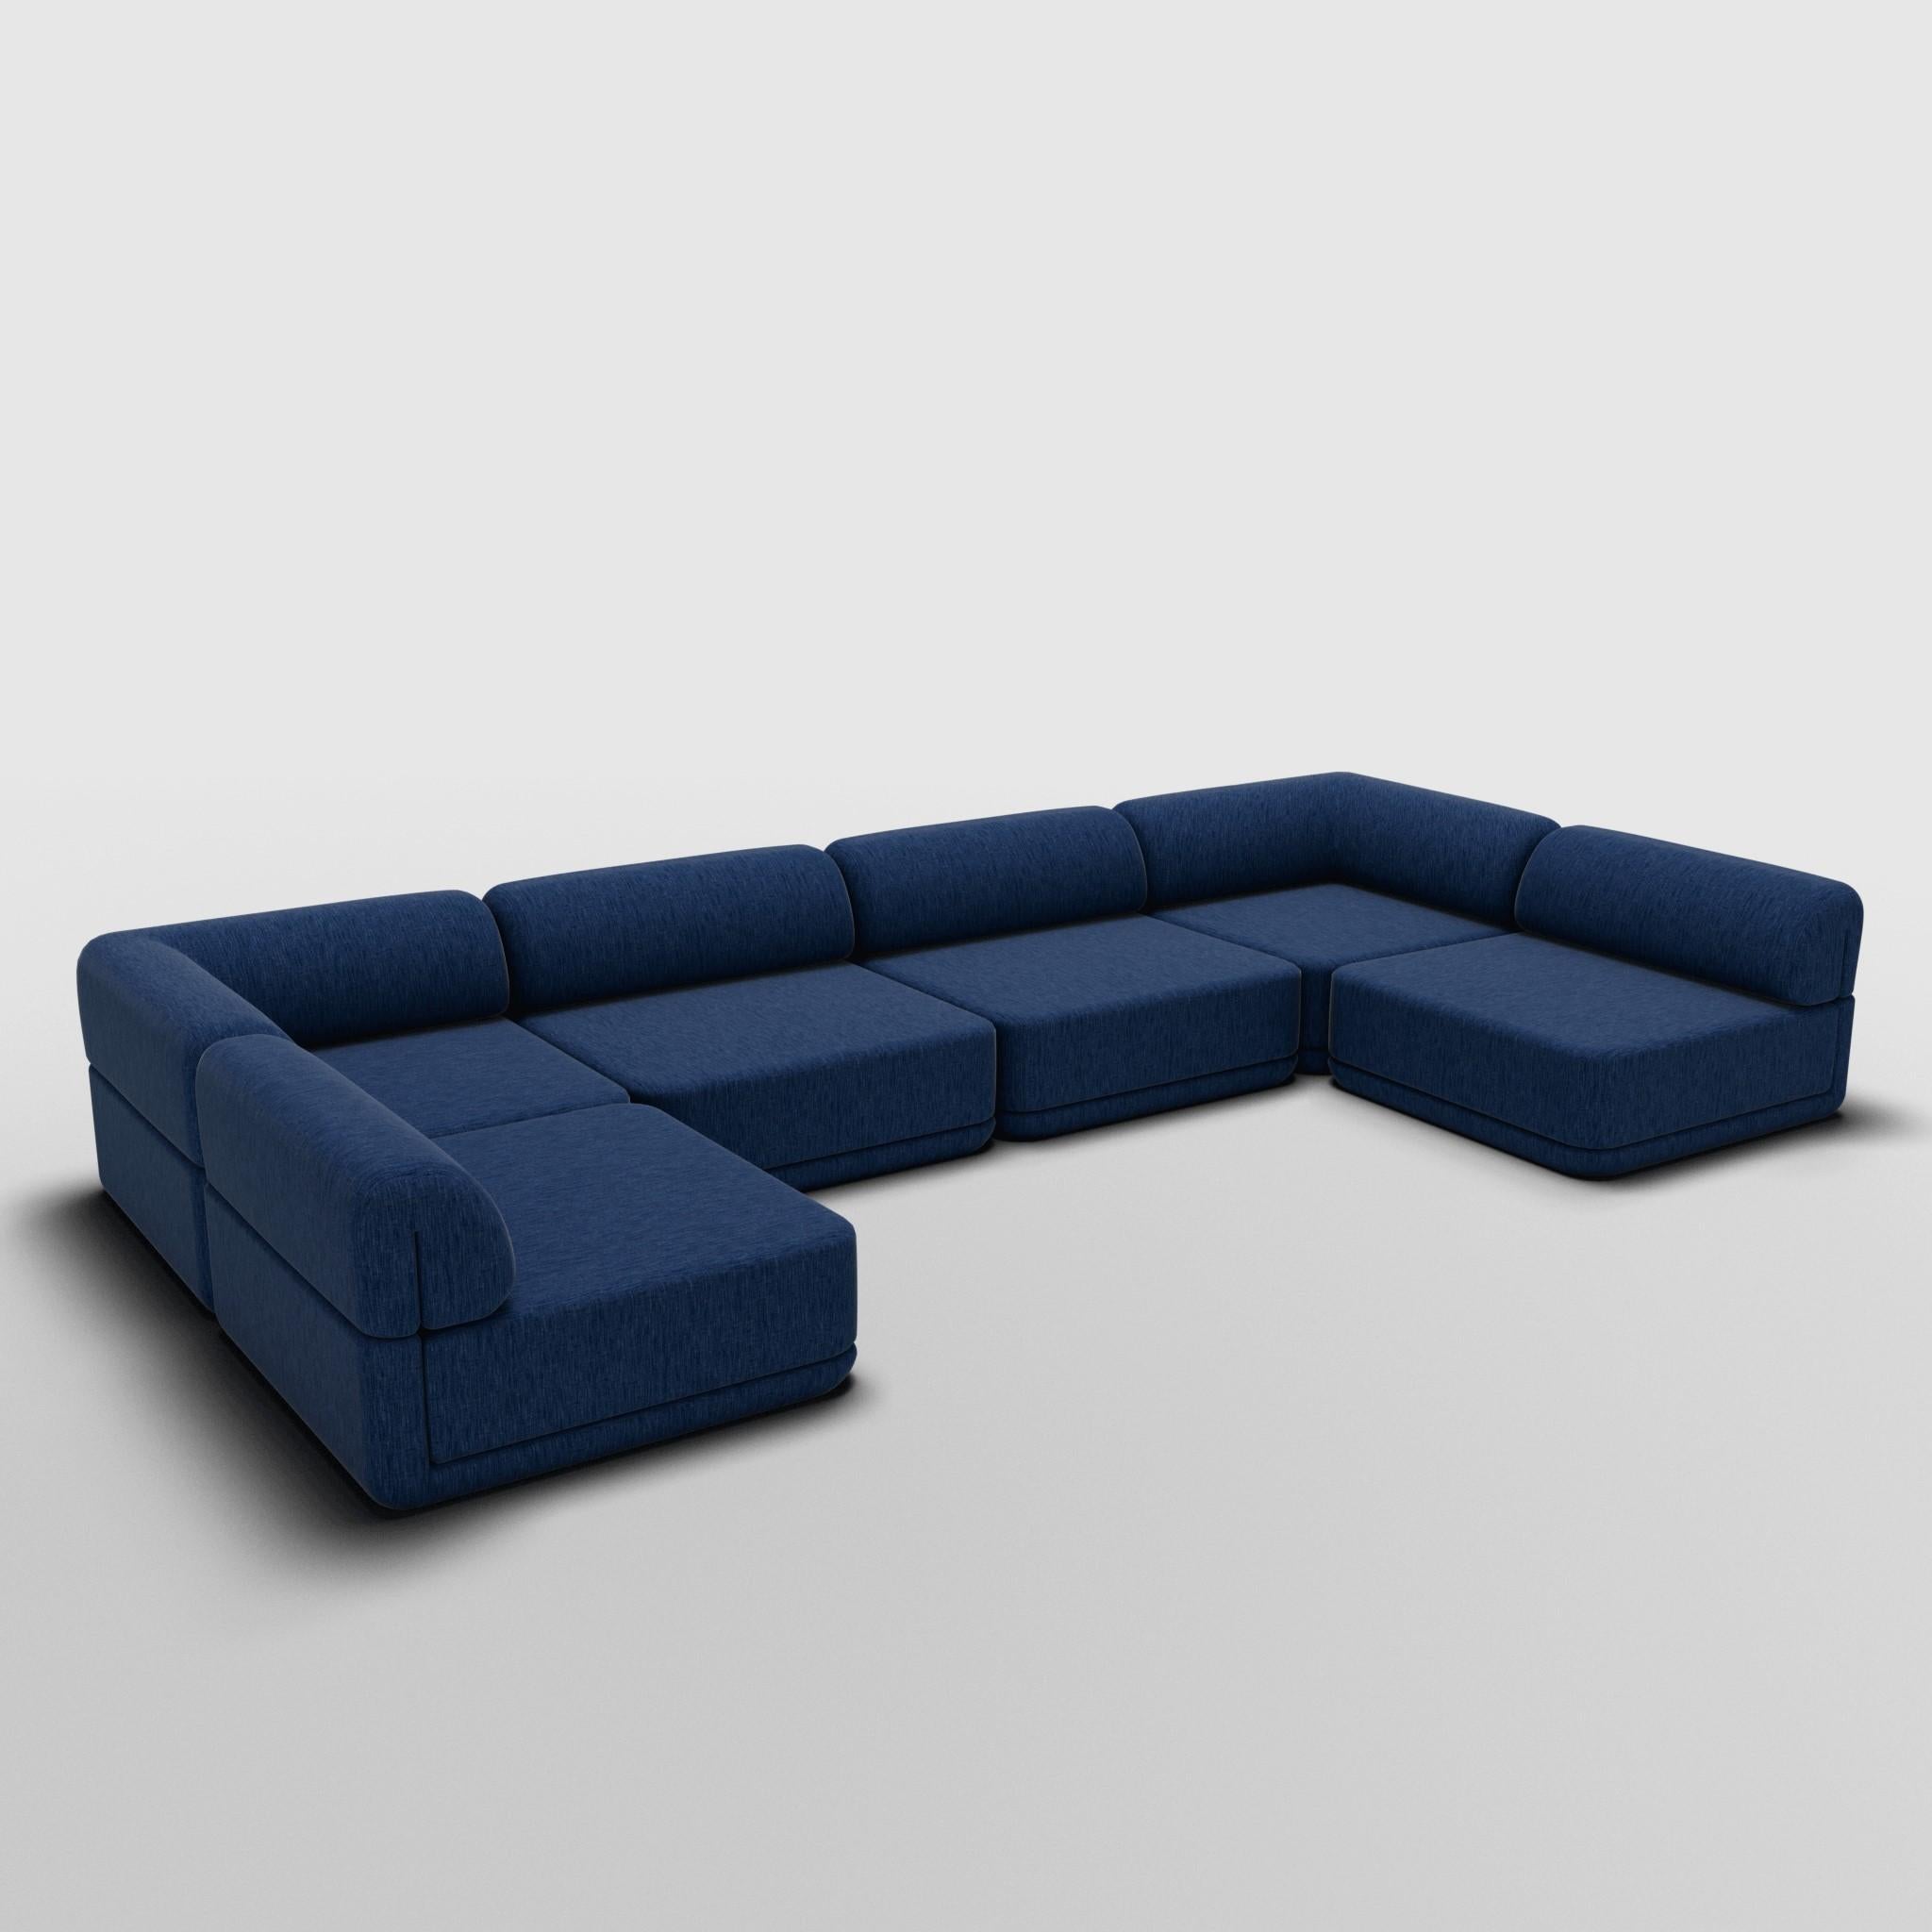 Contemporary The Cube Sofa - U-Shape Sectional For Sale